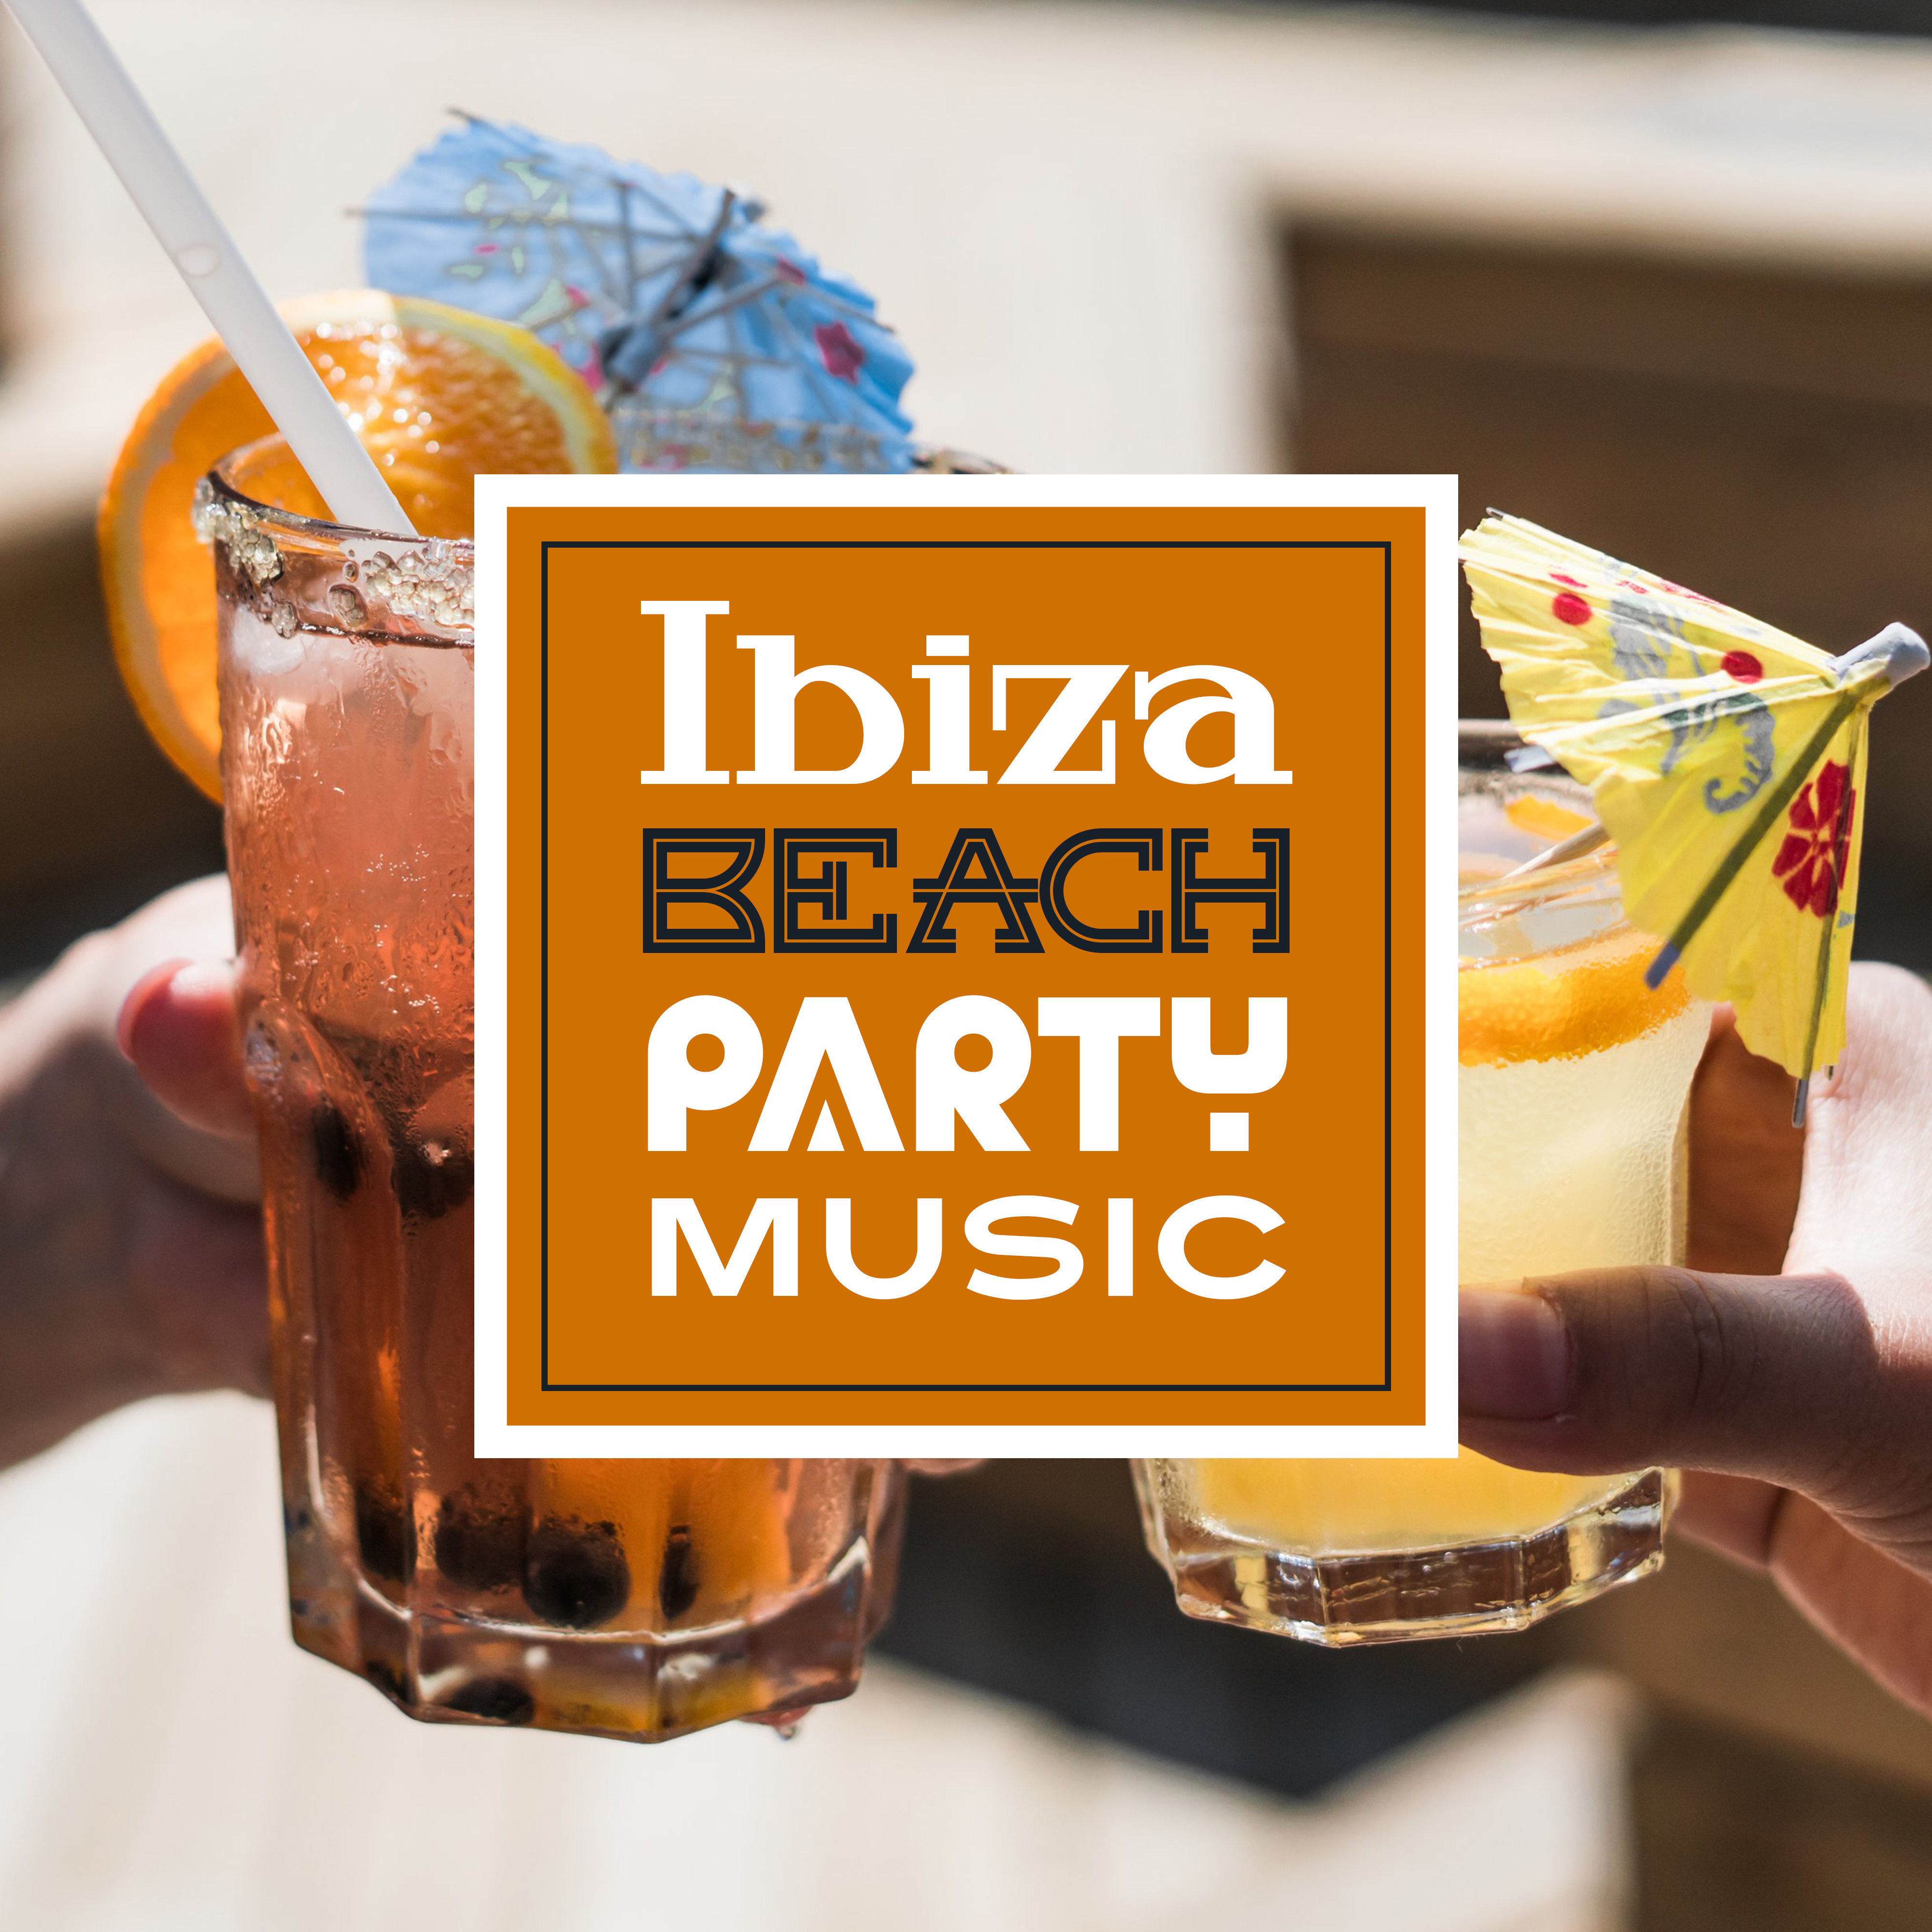 Ibiza Beach Party Music – Hot Chill Out Music All Night, Beach Dancefloor, Long Night Party